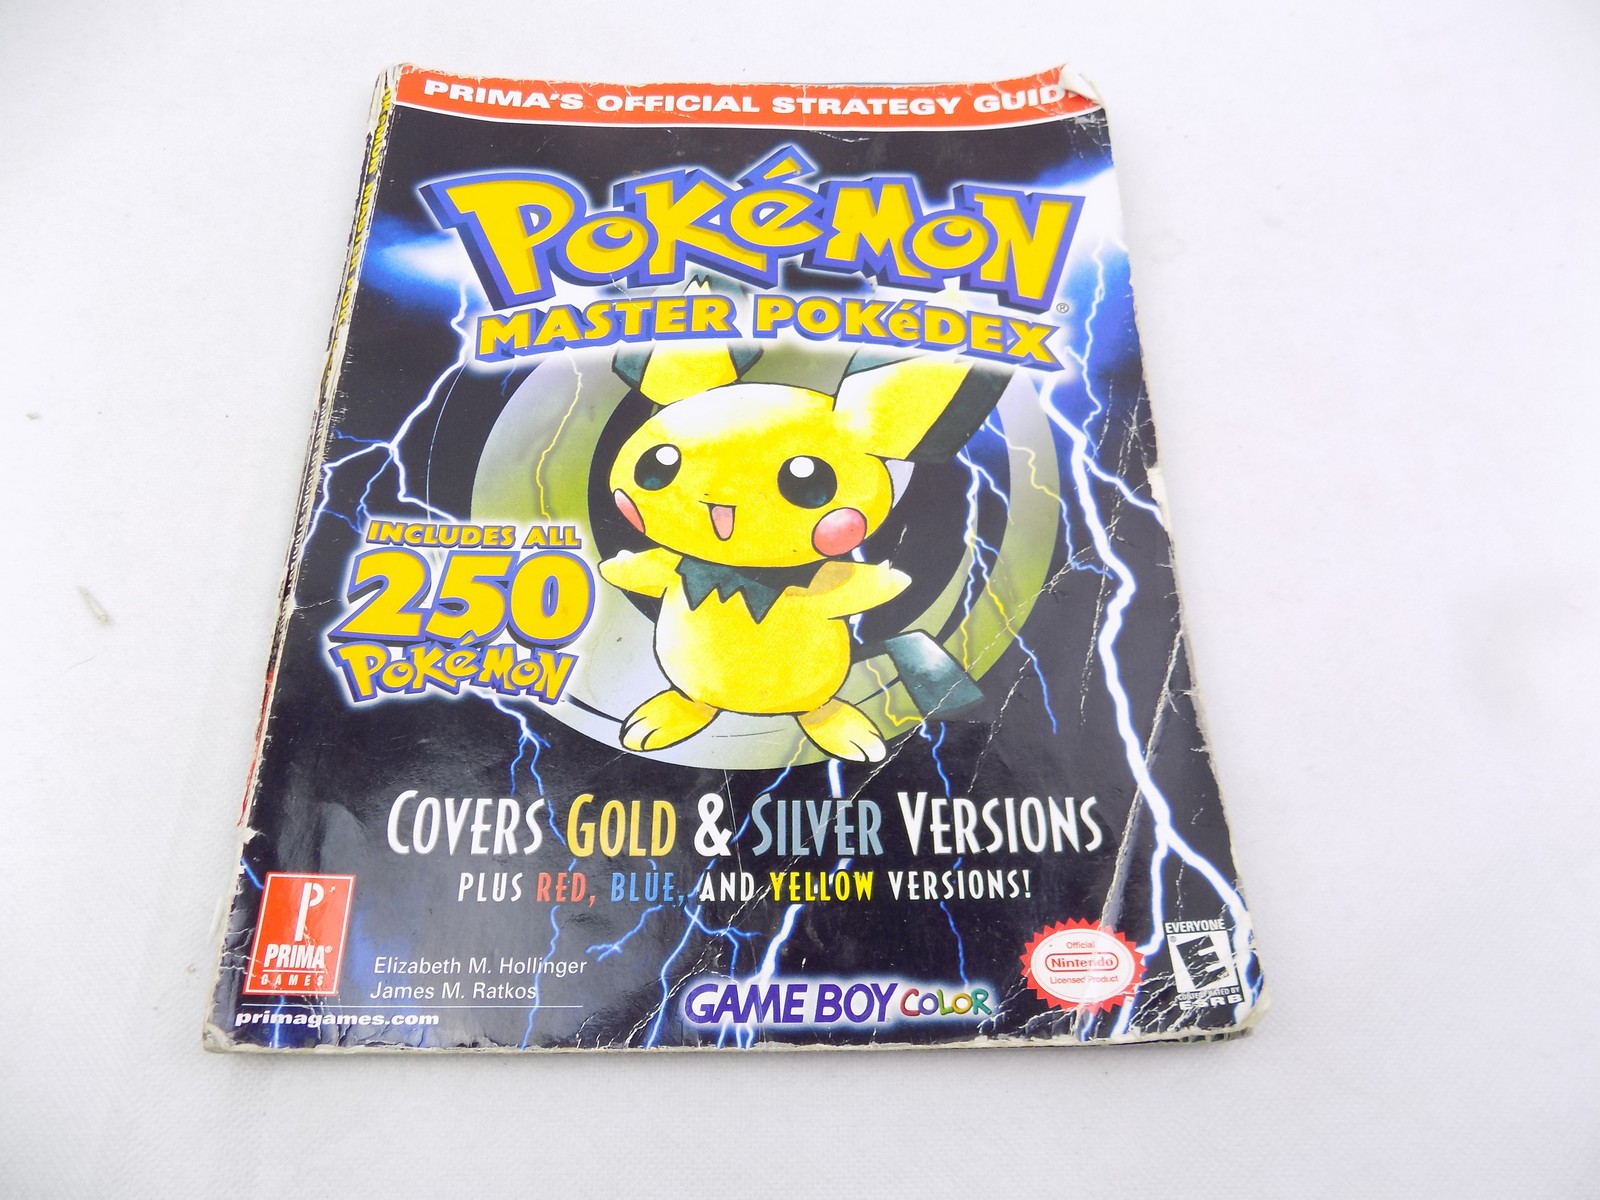 Pokemon Yellow (Prima's Official Strategy Guide) by Hollinger